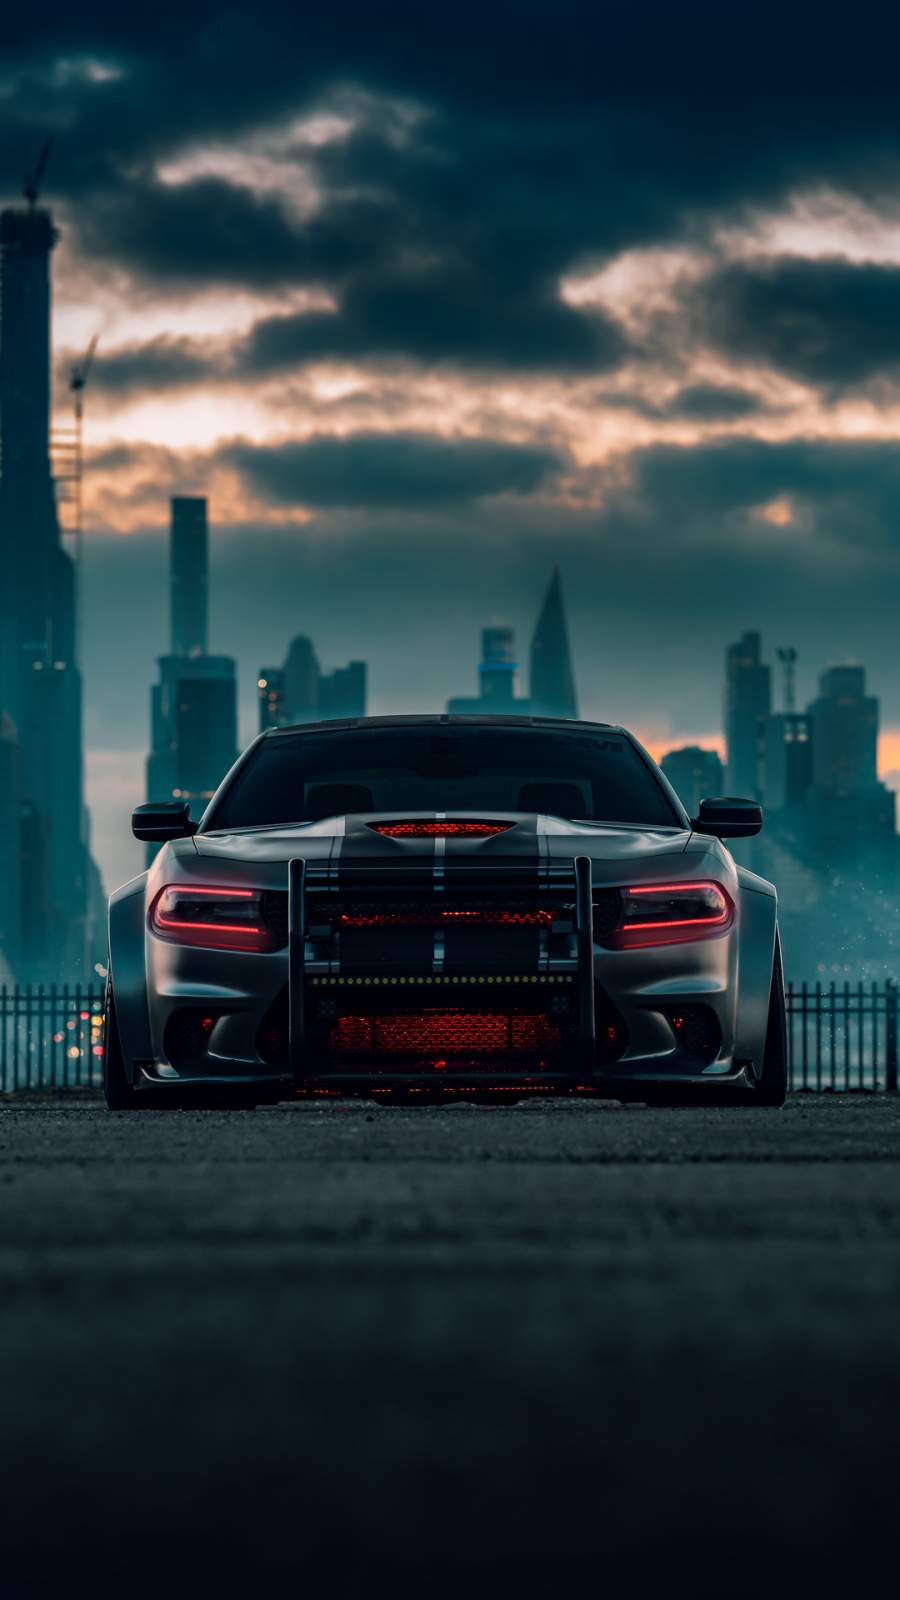 Download Get the hottest new device the Hellcat iPhone Wallpaper   Wallpaperscom